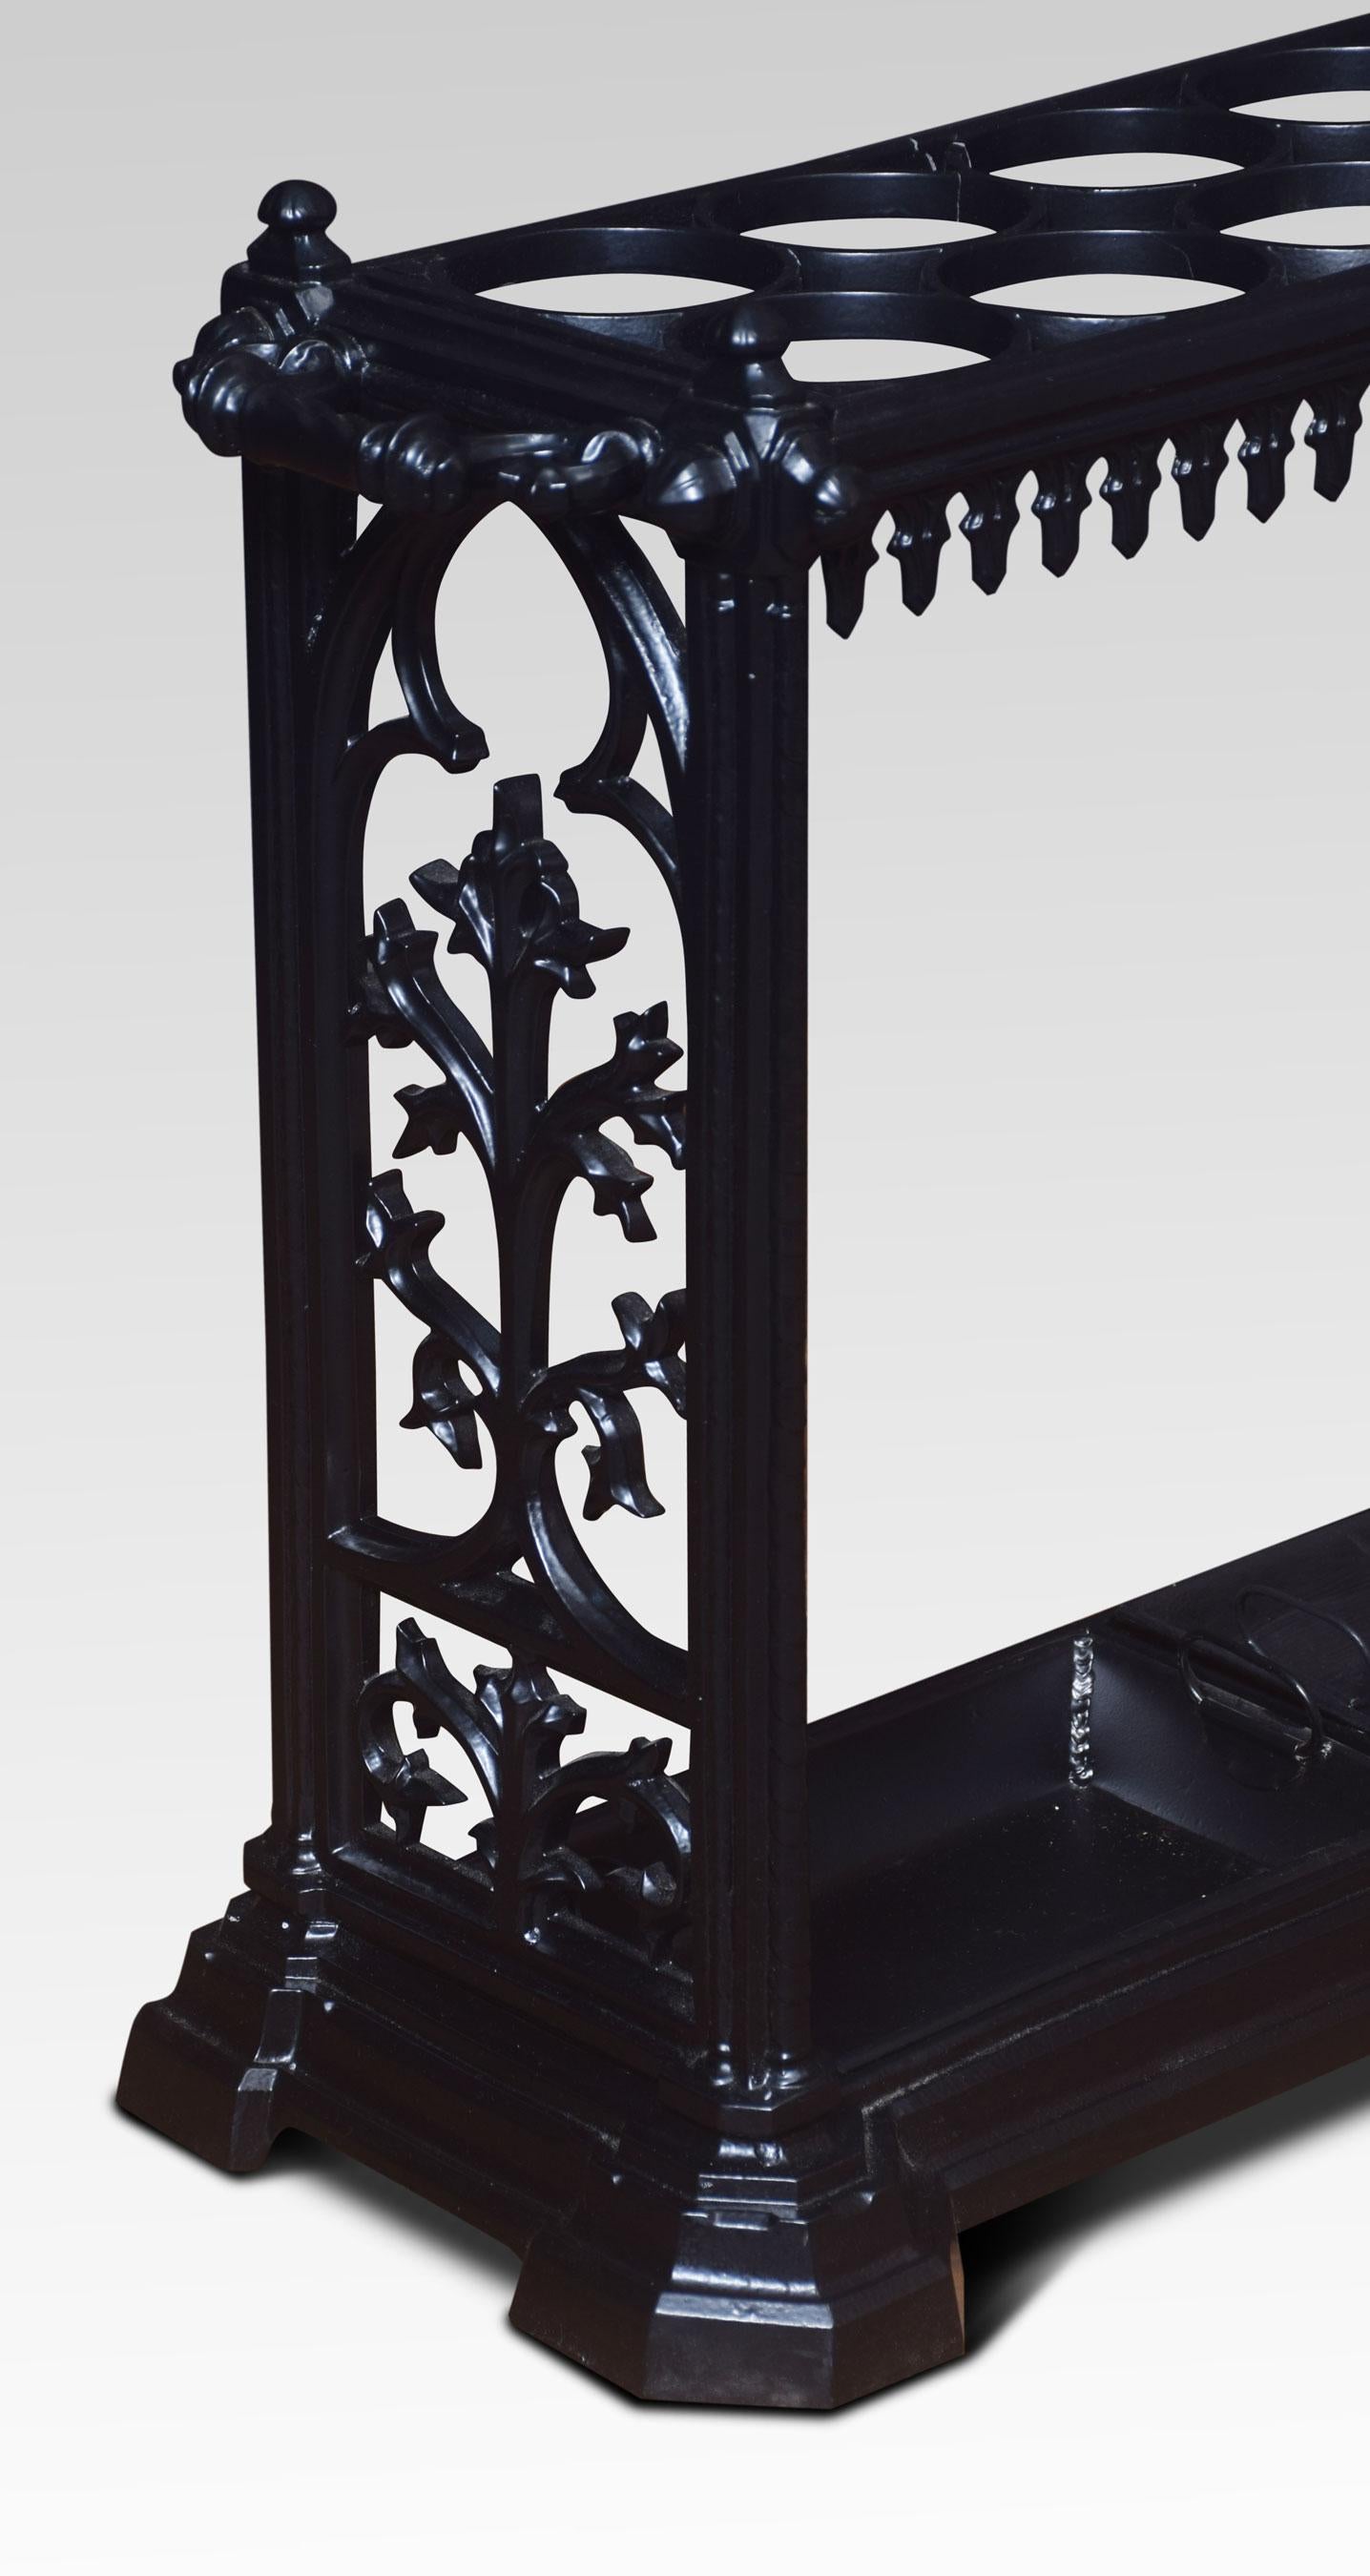 Cast iron twenty-four ring umbrella stand of rectangular form, with raised finials to each corner and circular apertures, the ends with foliated decoration above with drop-in drip trays and cast base.
Dimensions:
Height 23 inches
Width 55